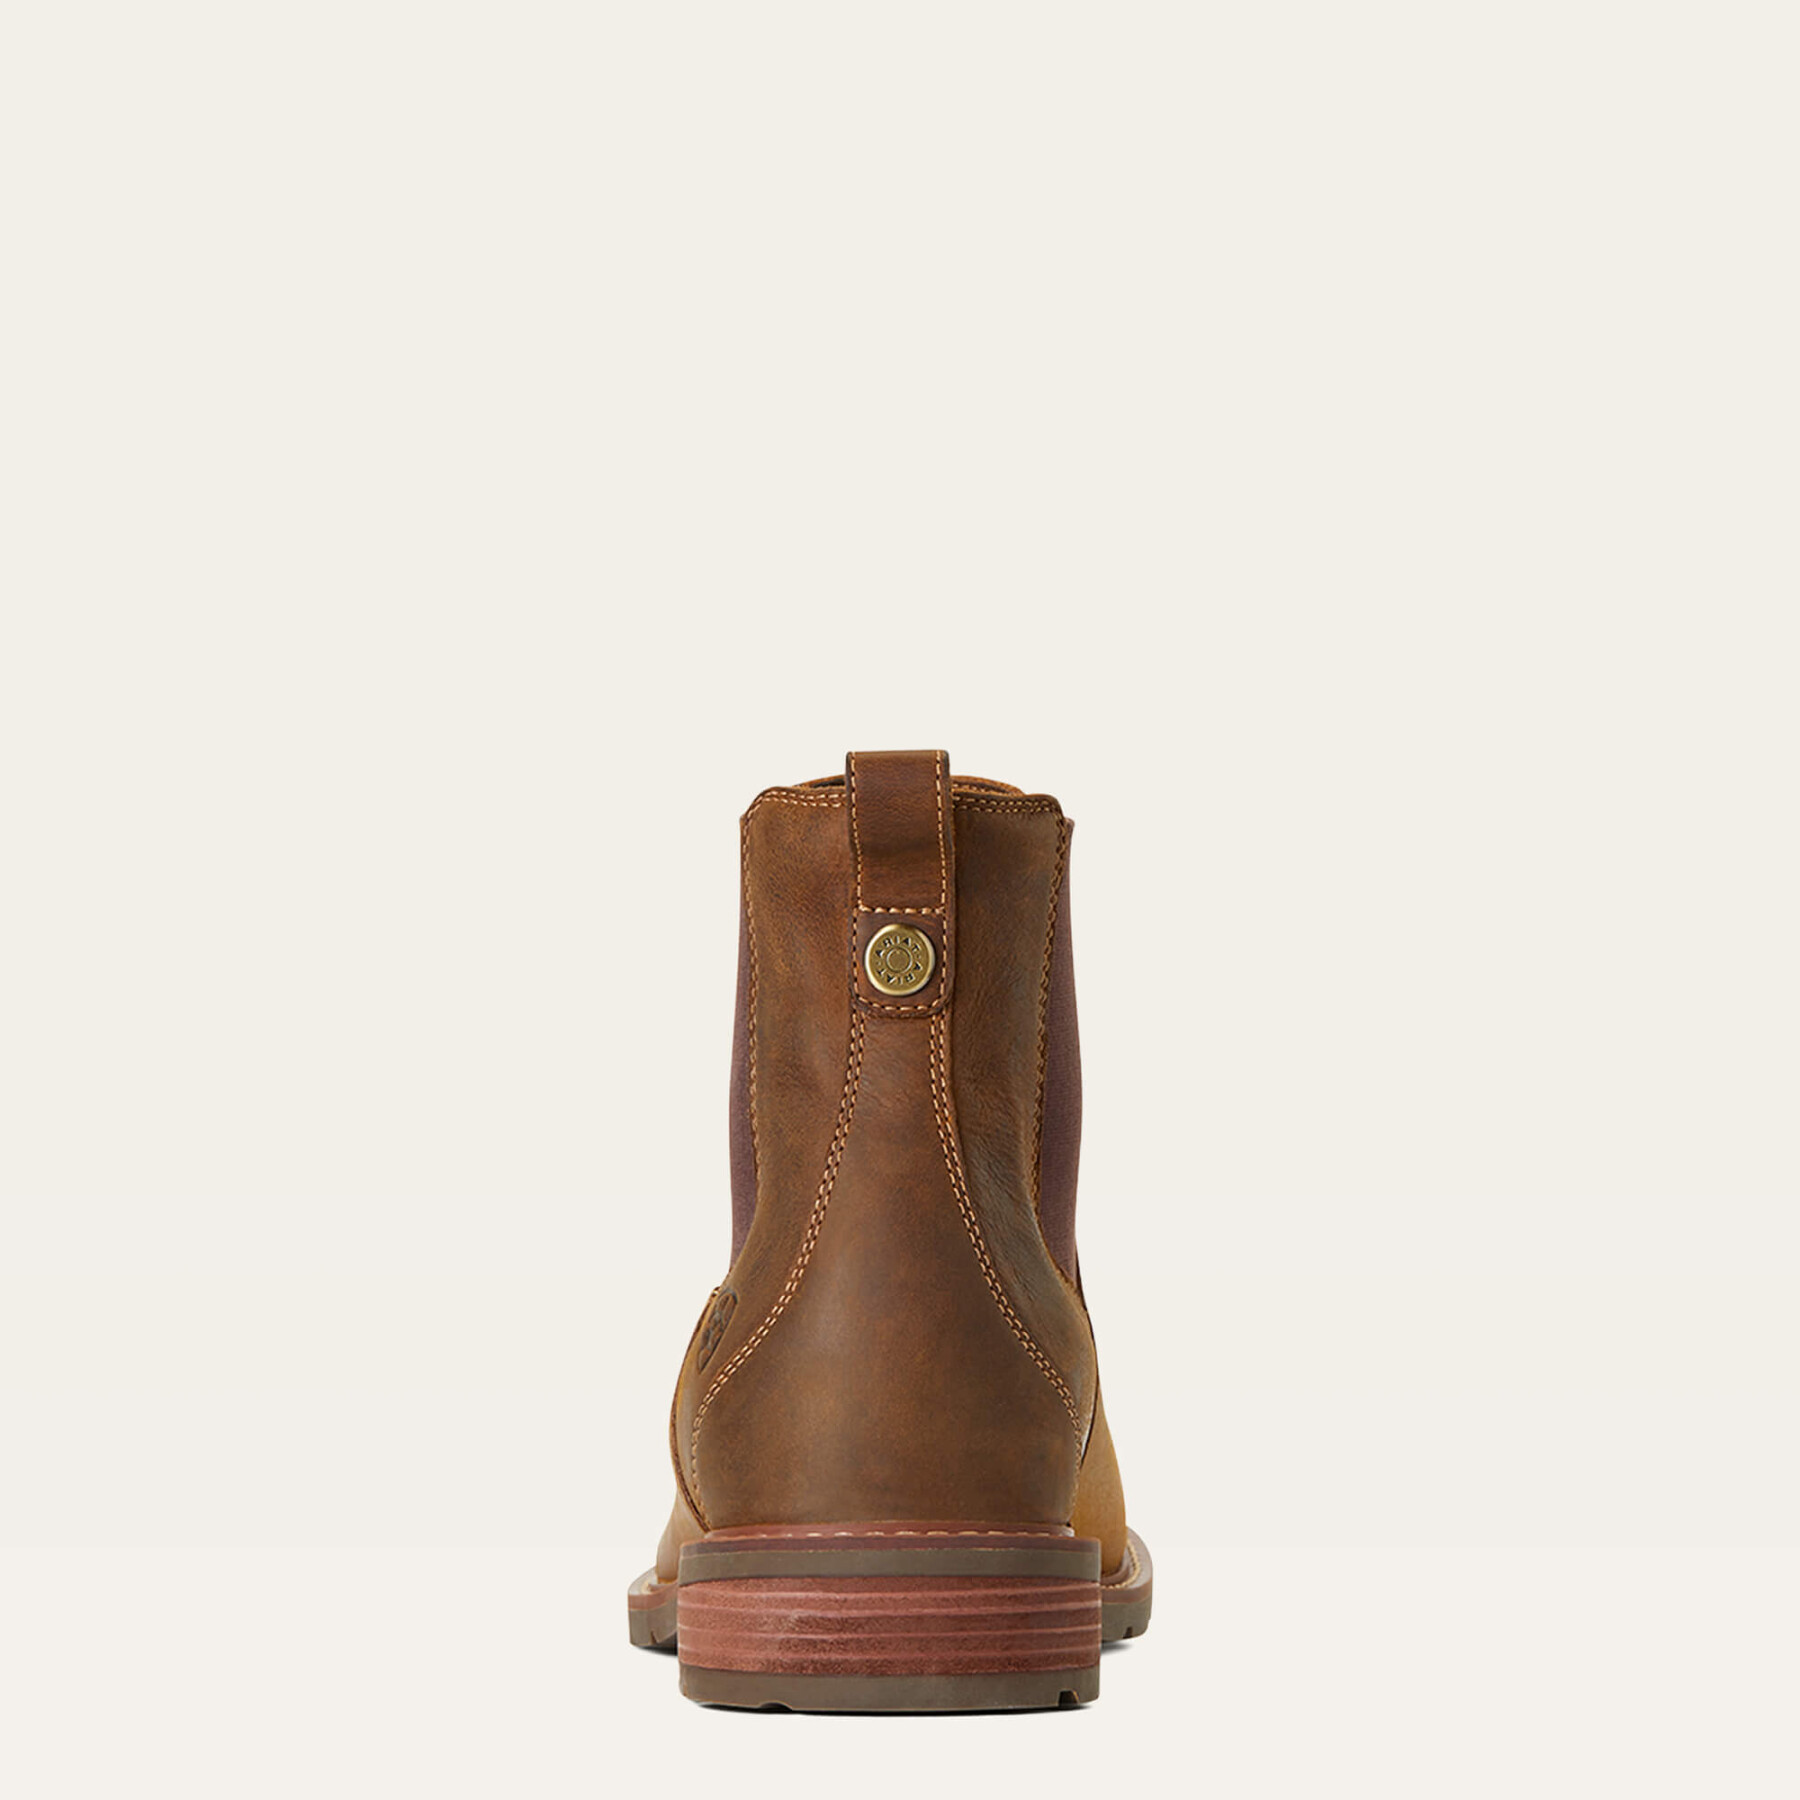 Bottines imperméable Ariat Wexford H2O